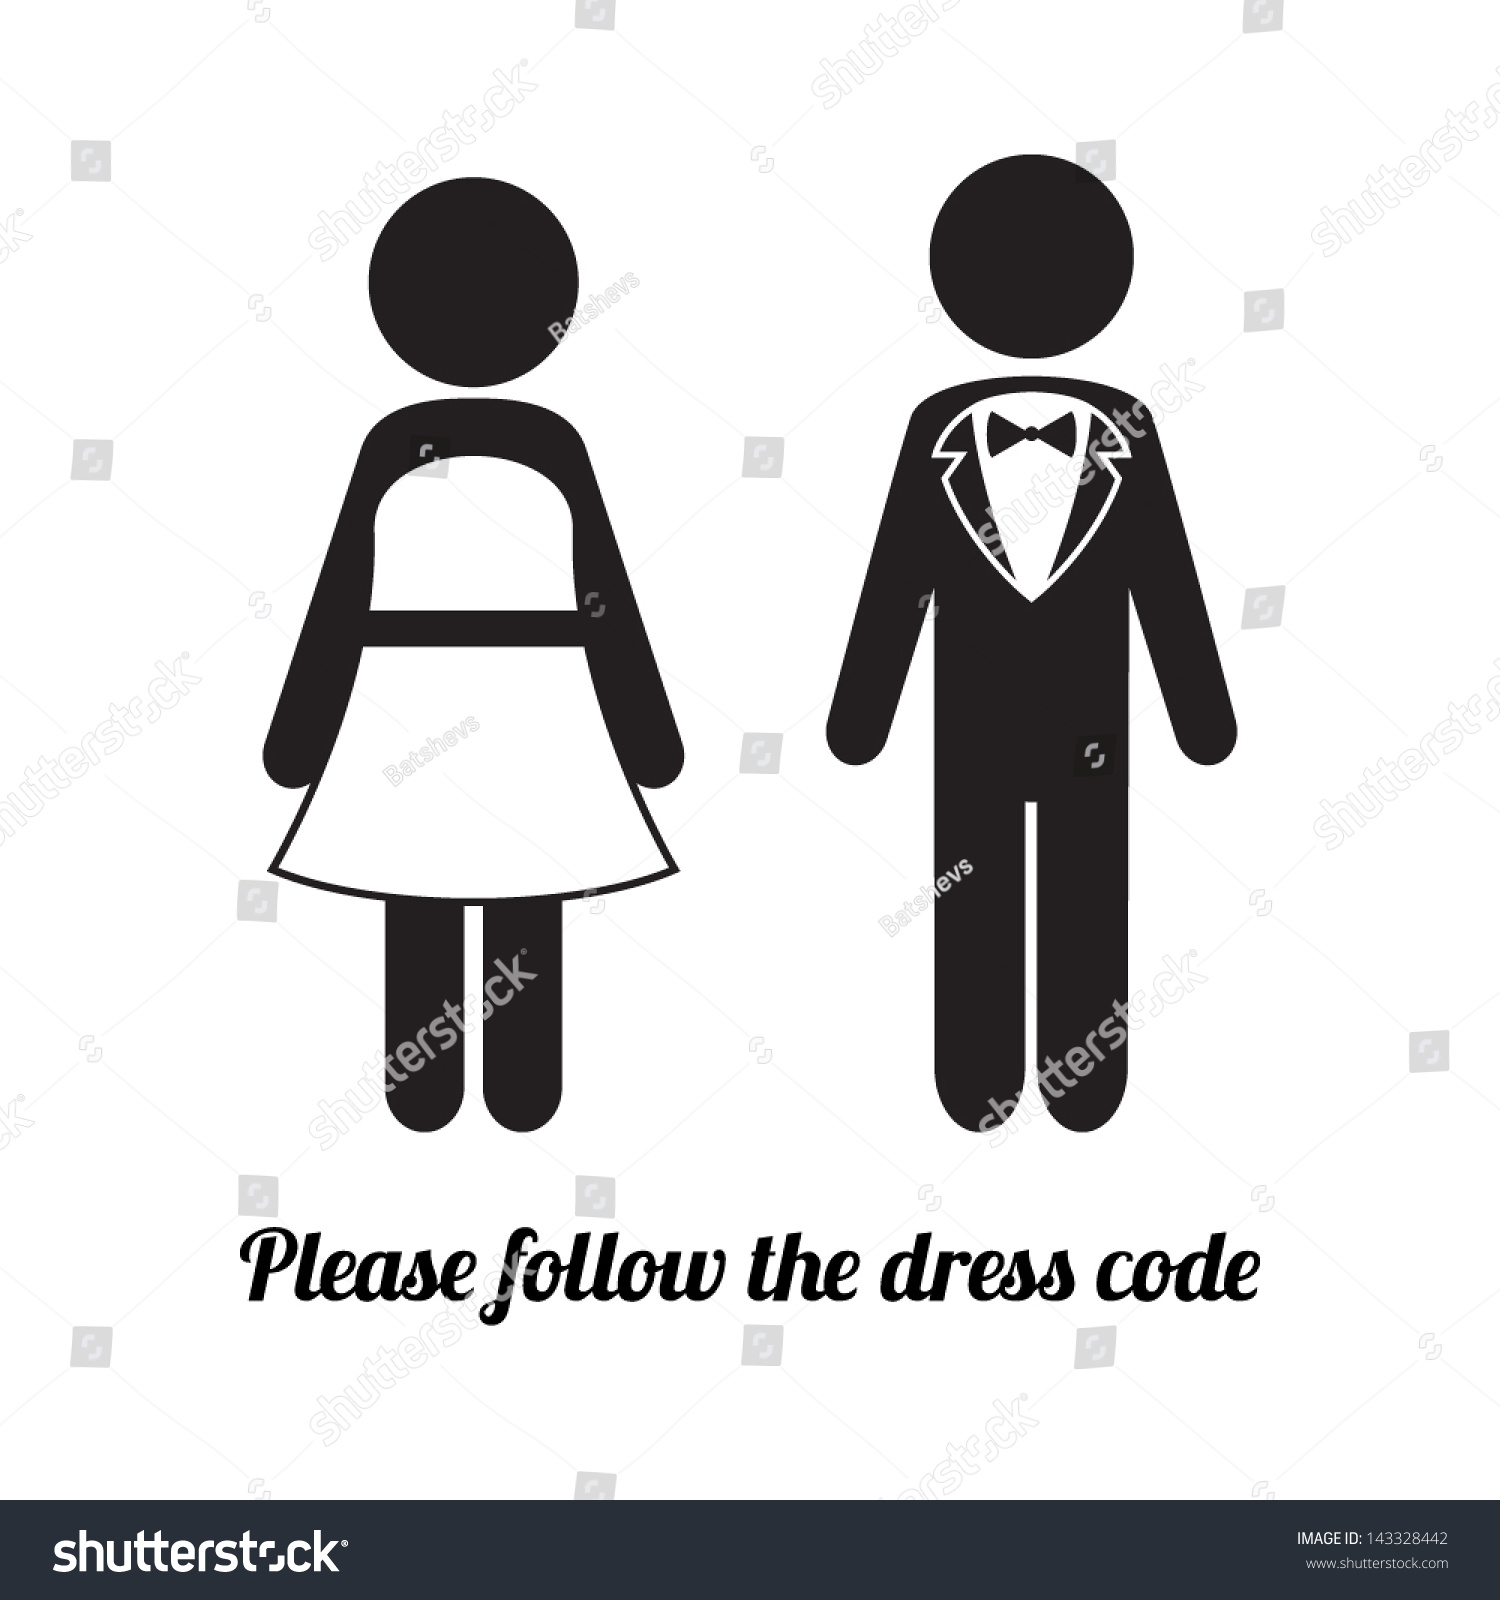 Man And Woman Icons. Black Tie Dress Code Icon Stock ...